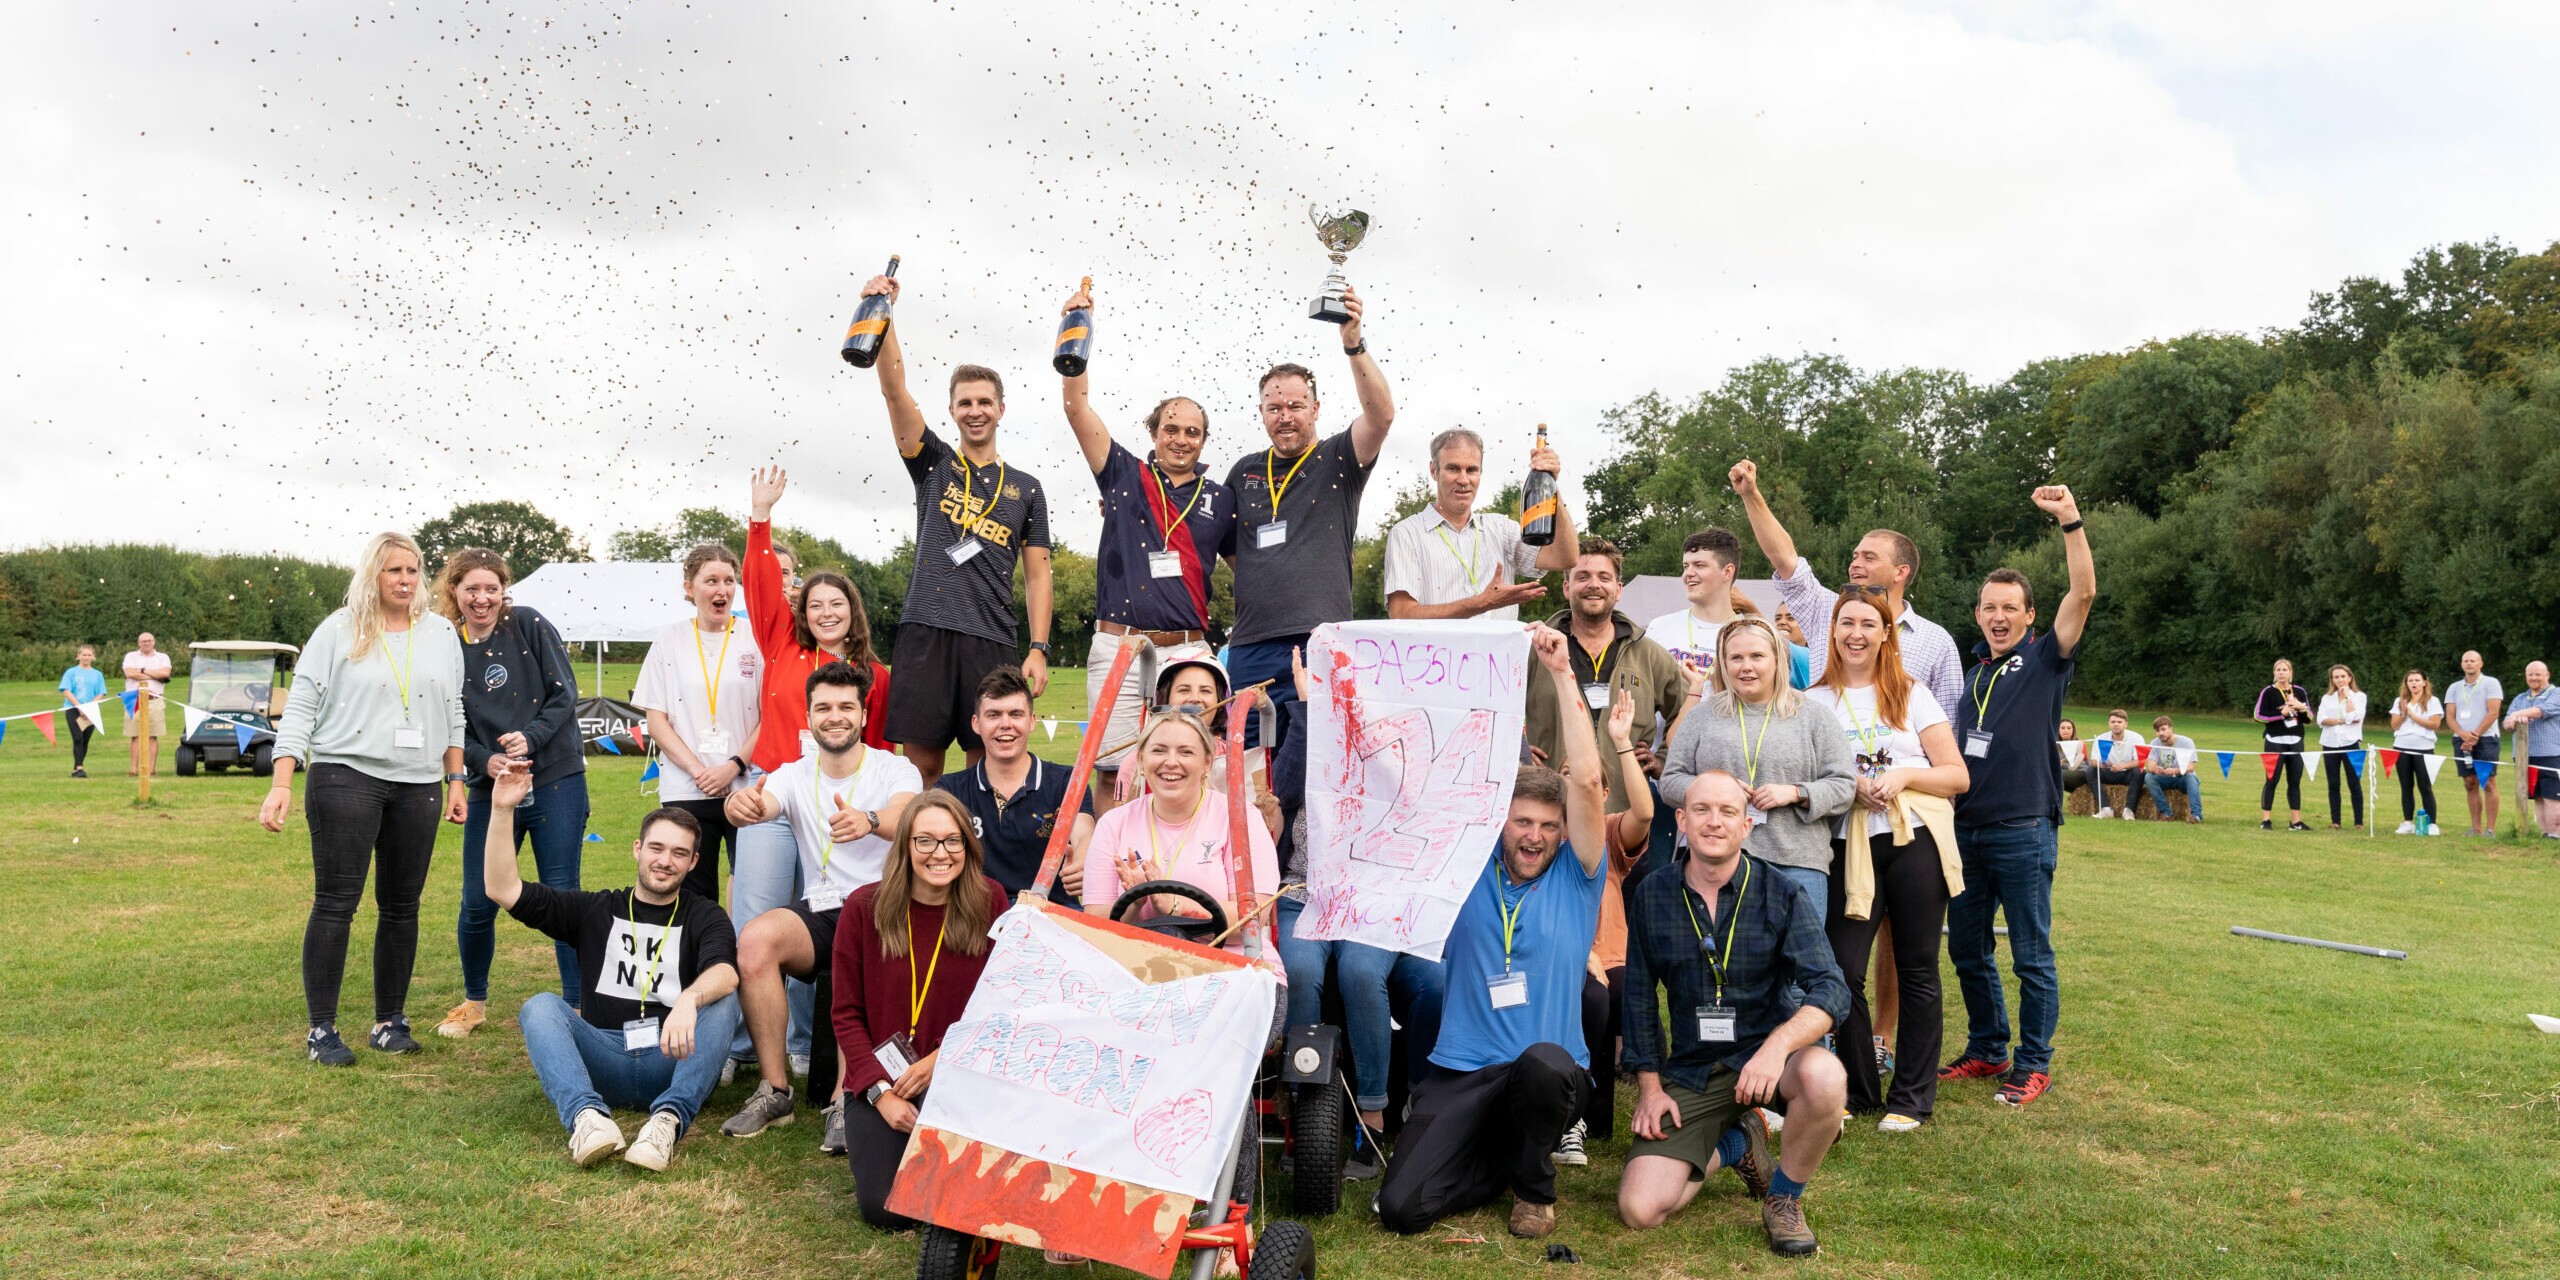 team of employees holding up trophy and medal after winning Soap Box Derby team building event